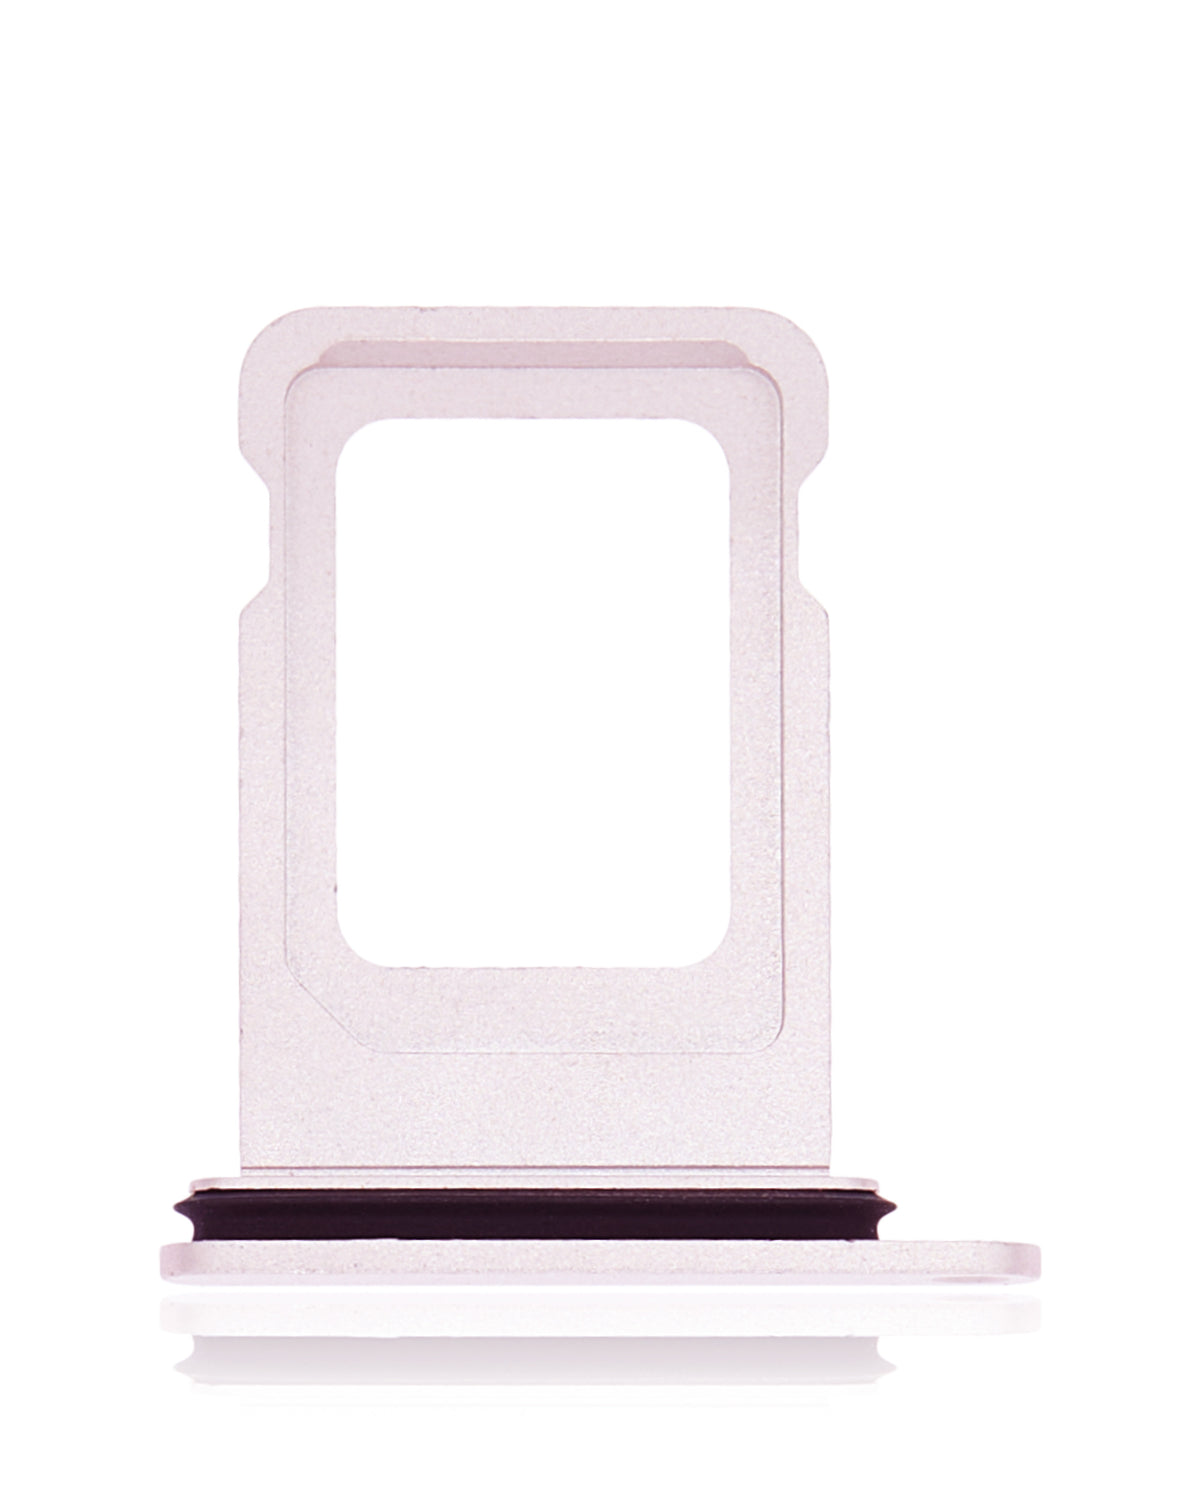 PINK DUAL SIM CARD TRAY COMPATIBLE WITH IPHONE 13